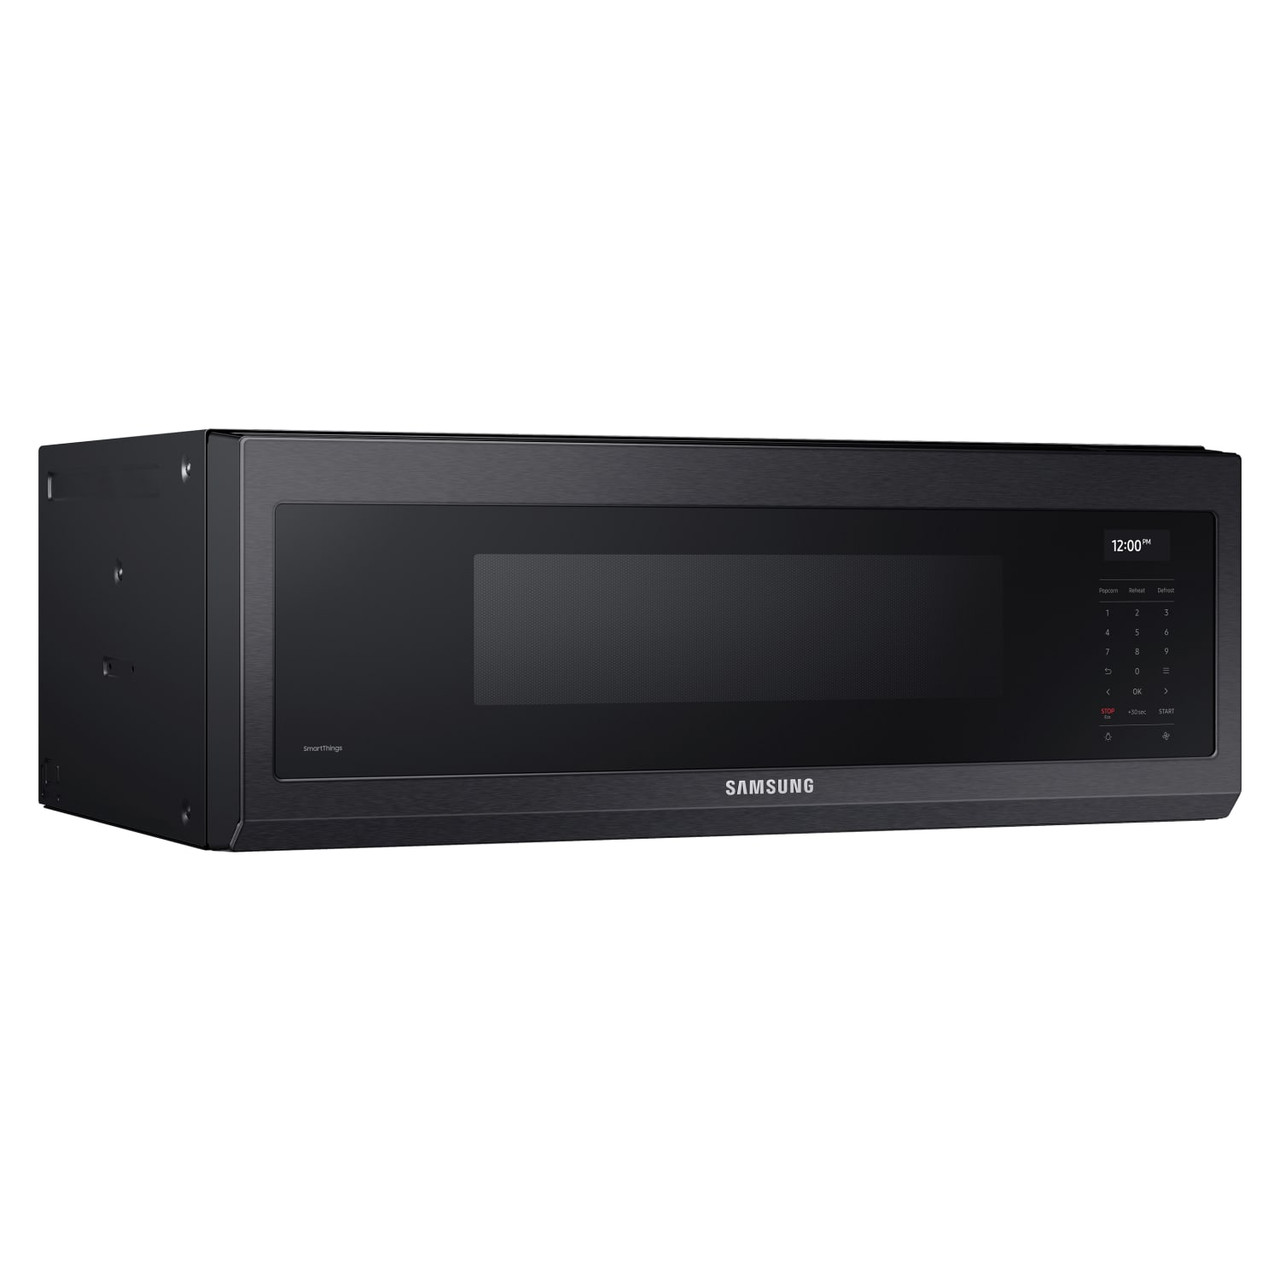 Samsung 1.1 cu. ft. Smart SLIM Over-the-Range Microwave with 550 cu. ft.M Ventilation, Wi-Fi & Voice Control - Black Stainless Steel